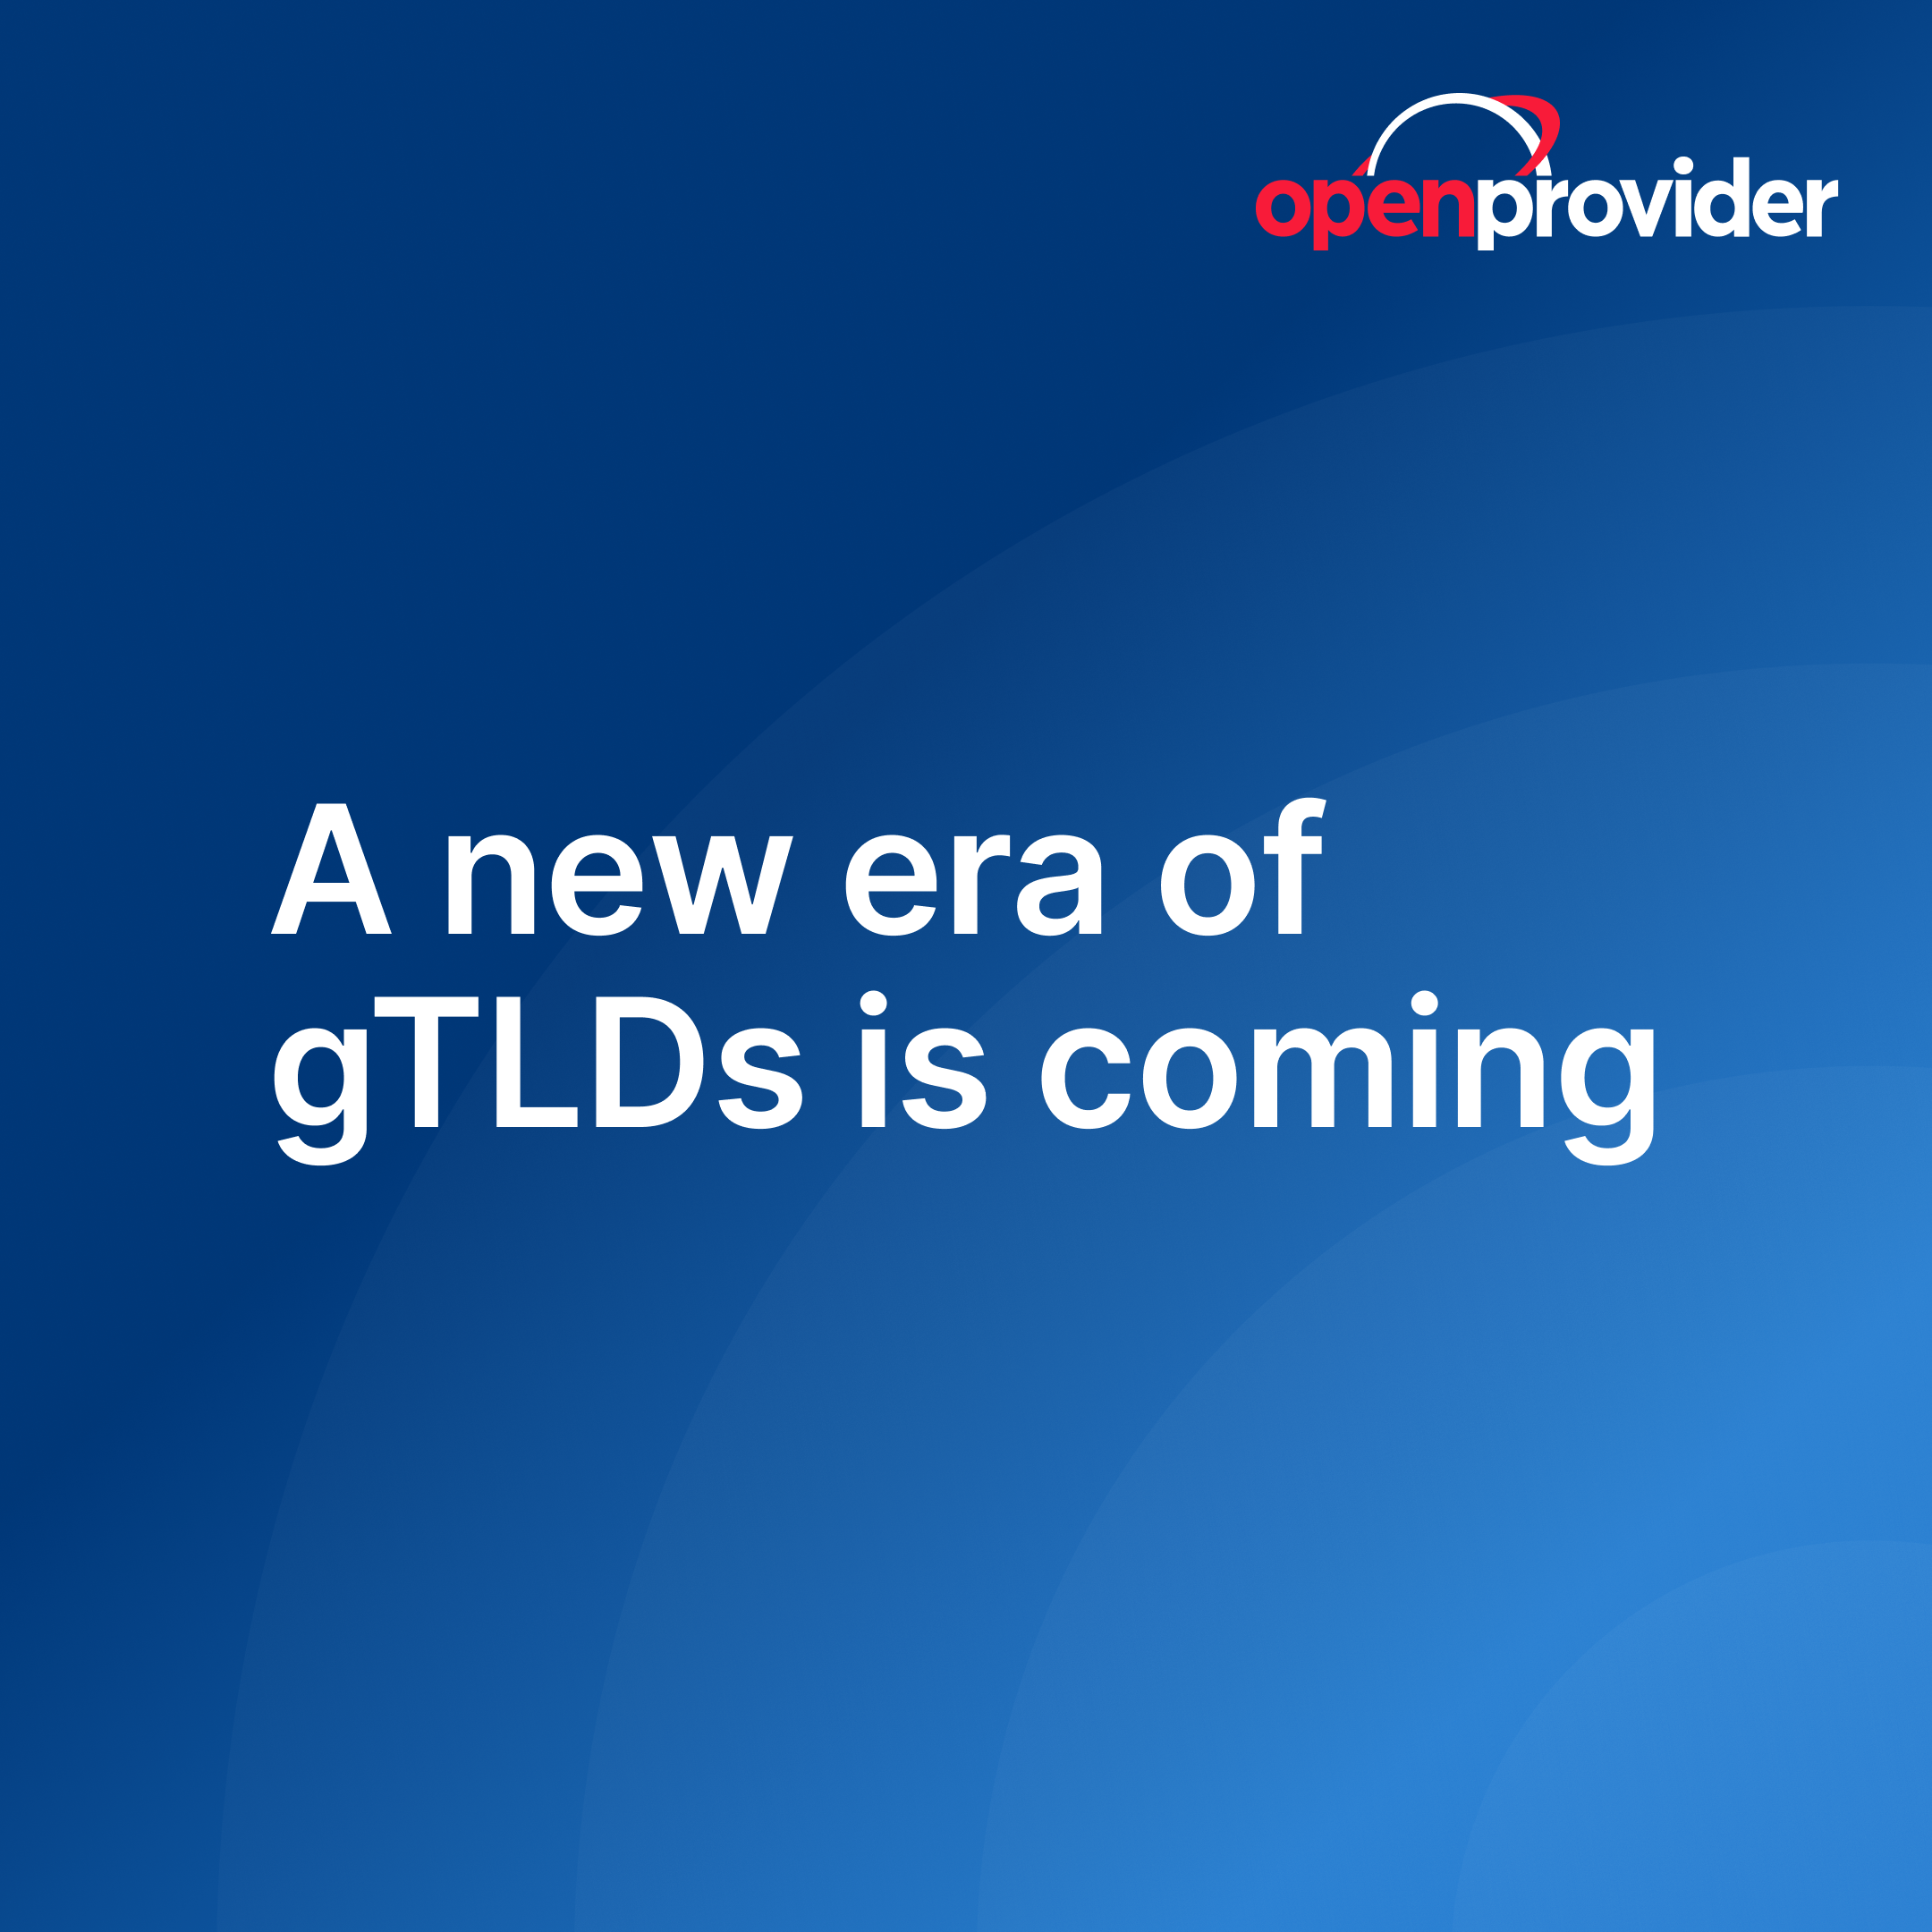 a new era of gTLDs is coming